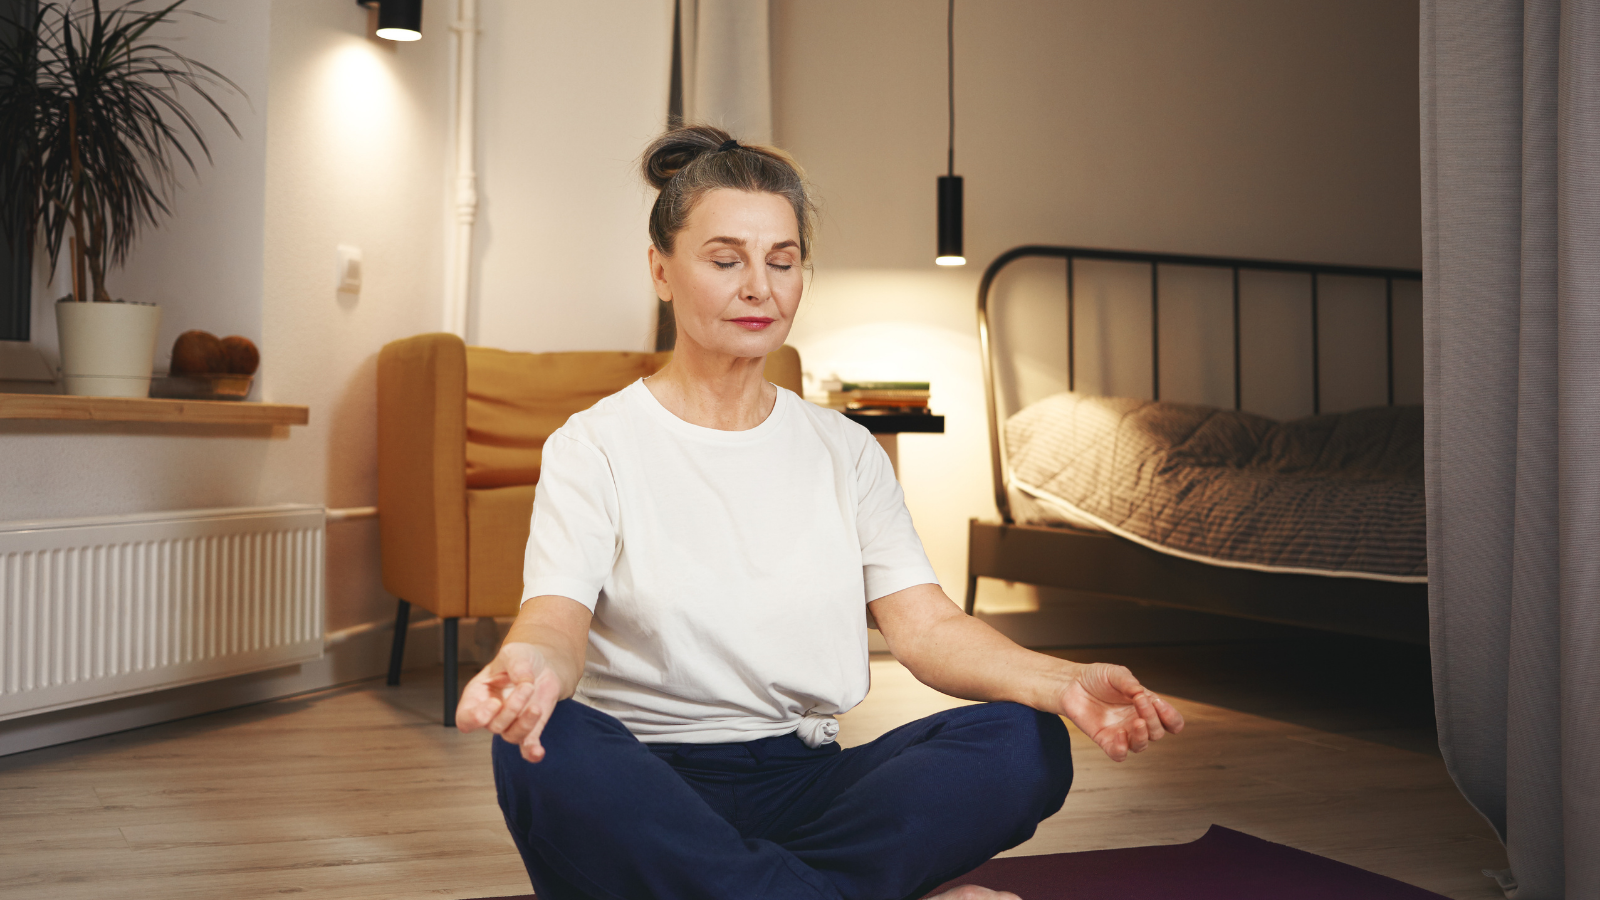 Meditation and visualization to support a healthier lifestyle and to relieve symptoms often associated with aging like arthritis